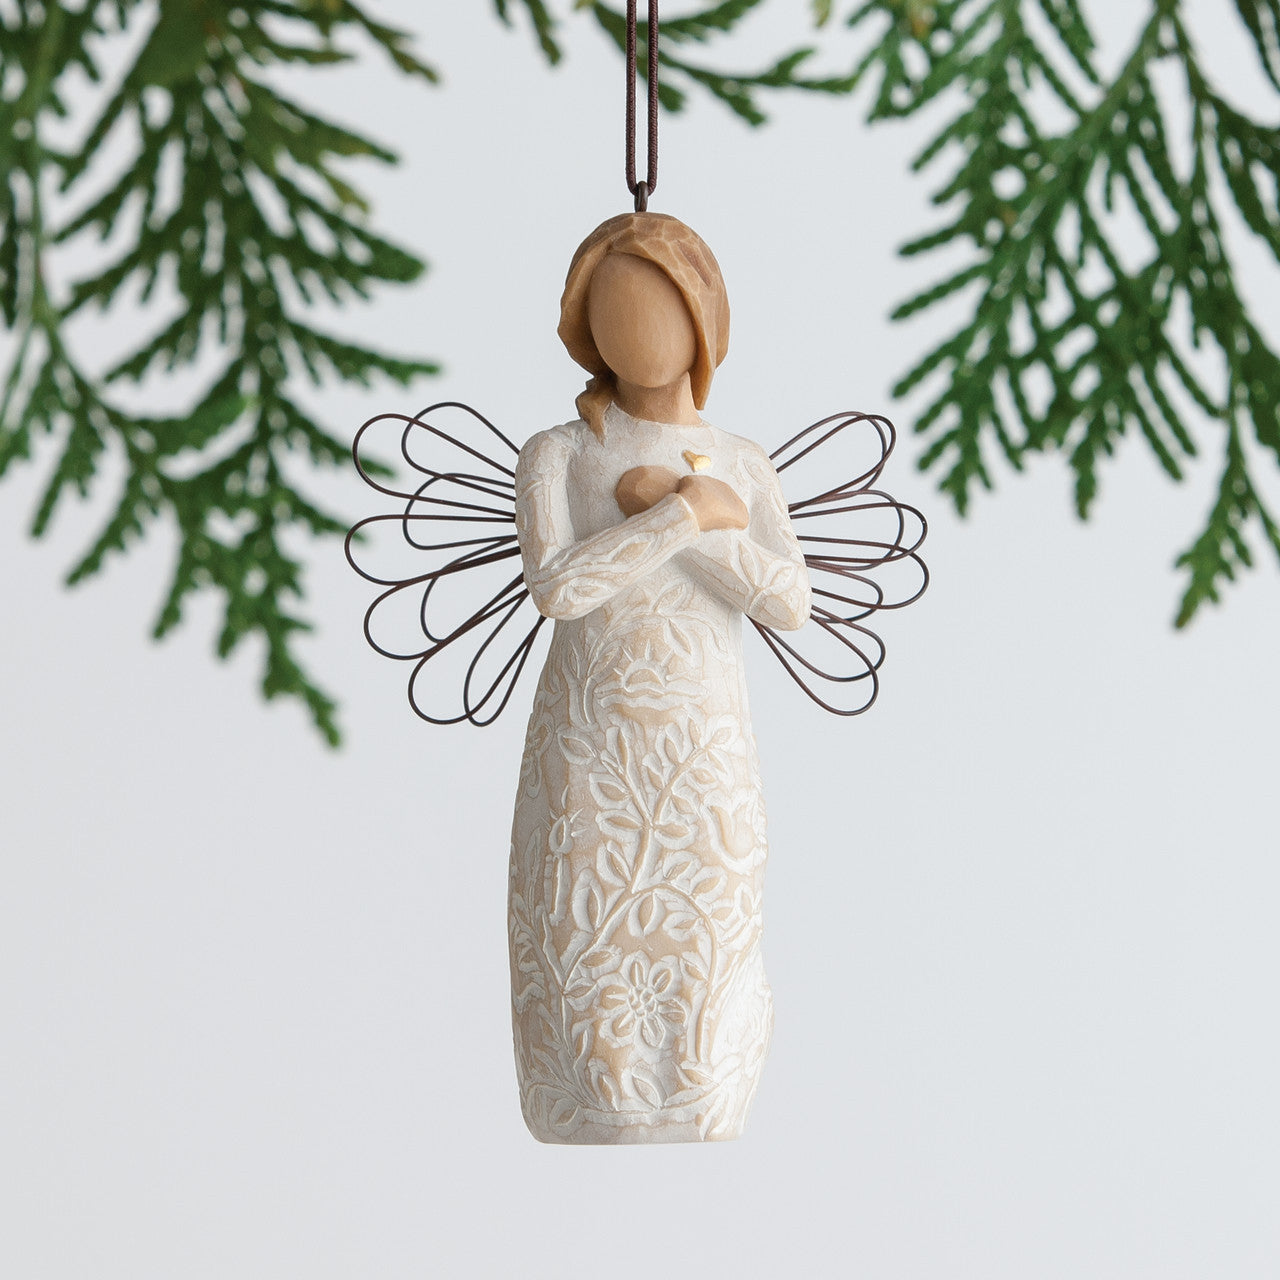 Willow Tree "Remembrance" hanging Ornament